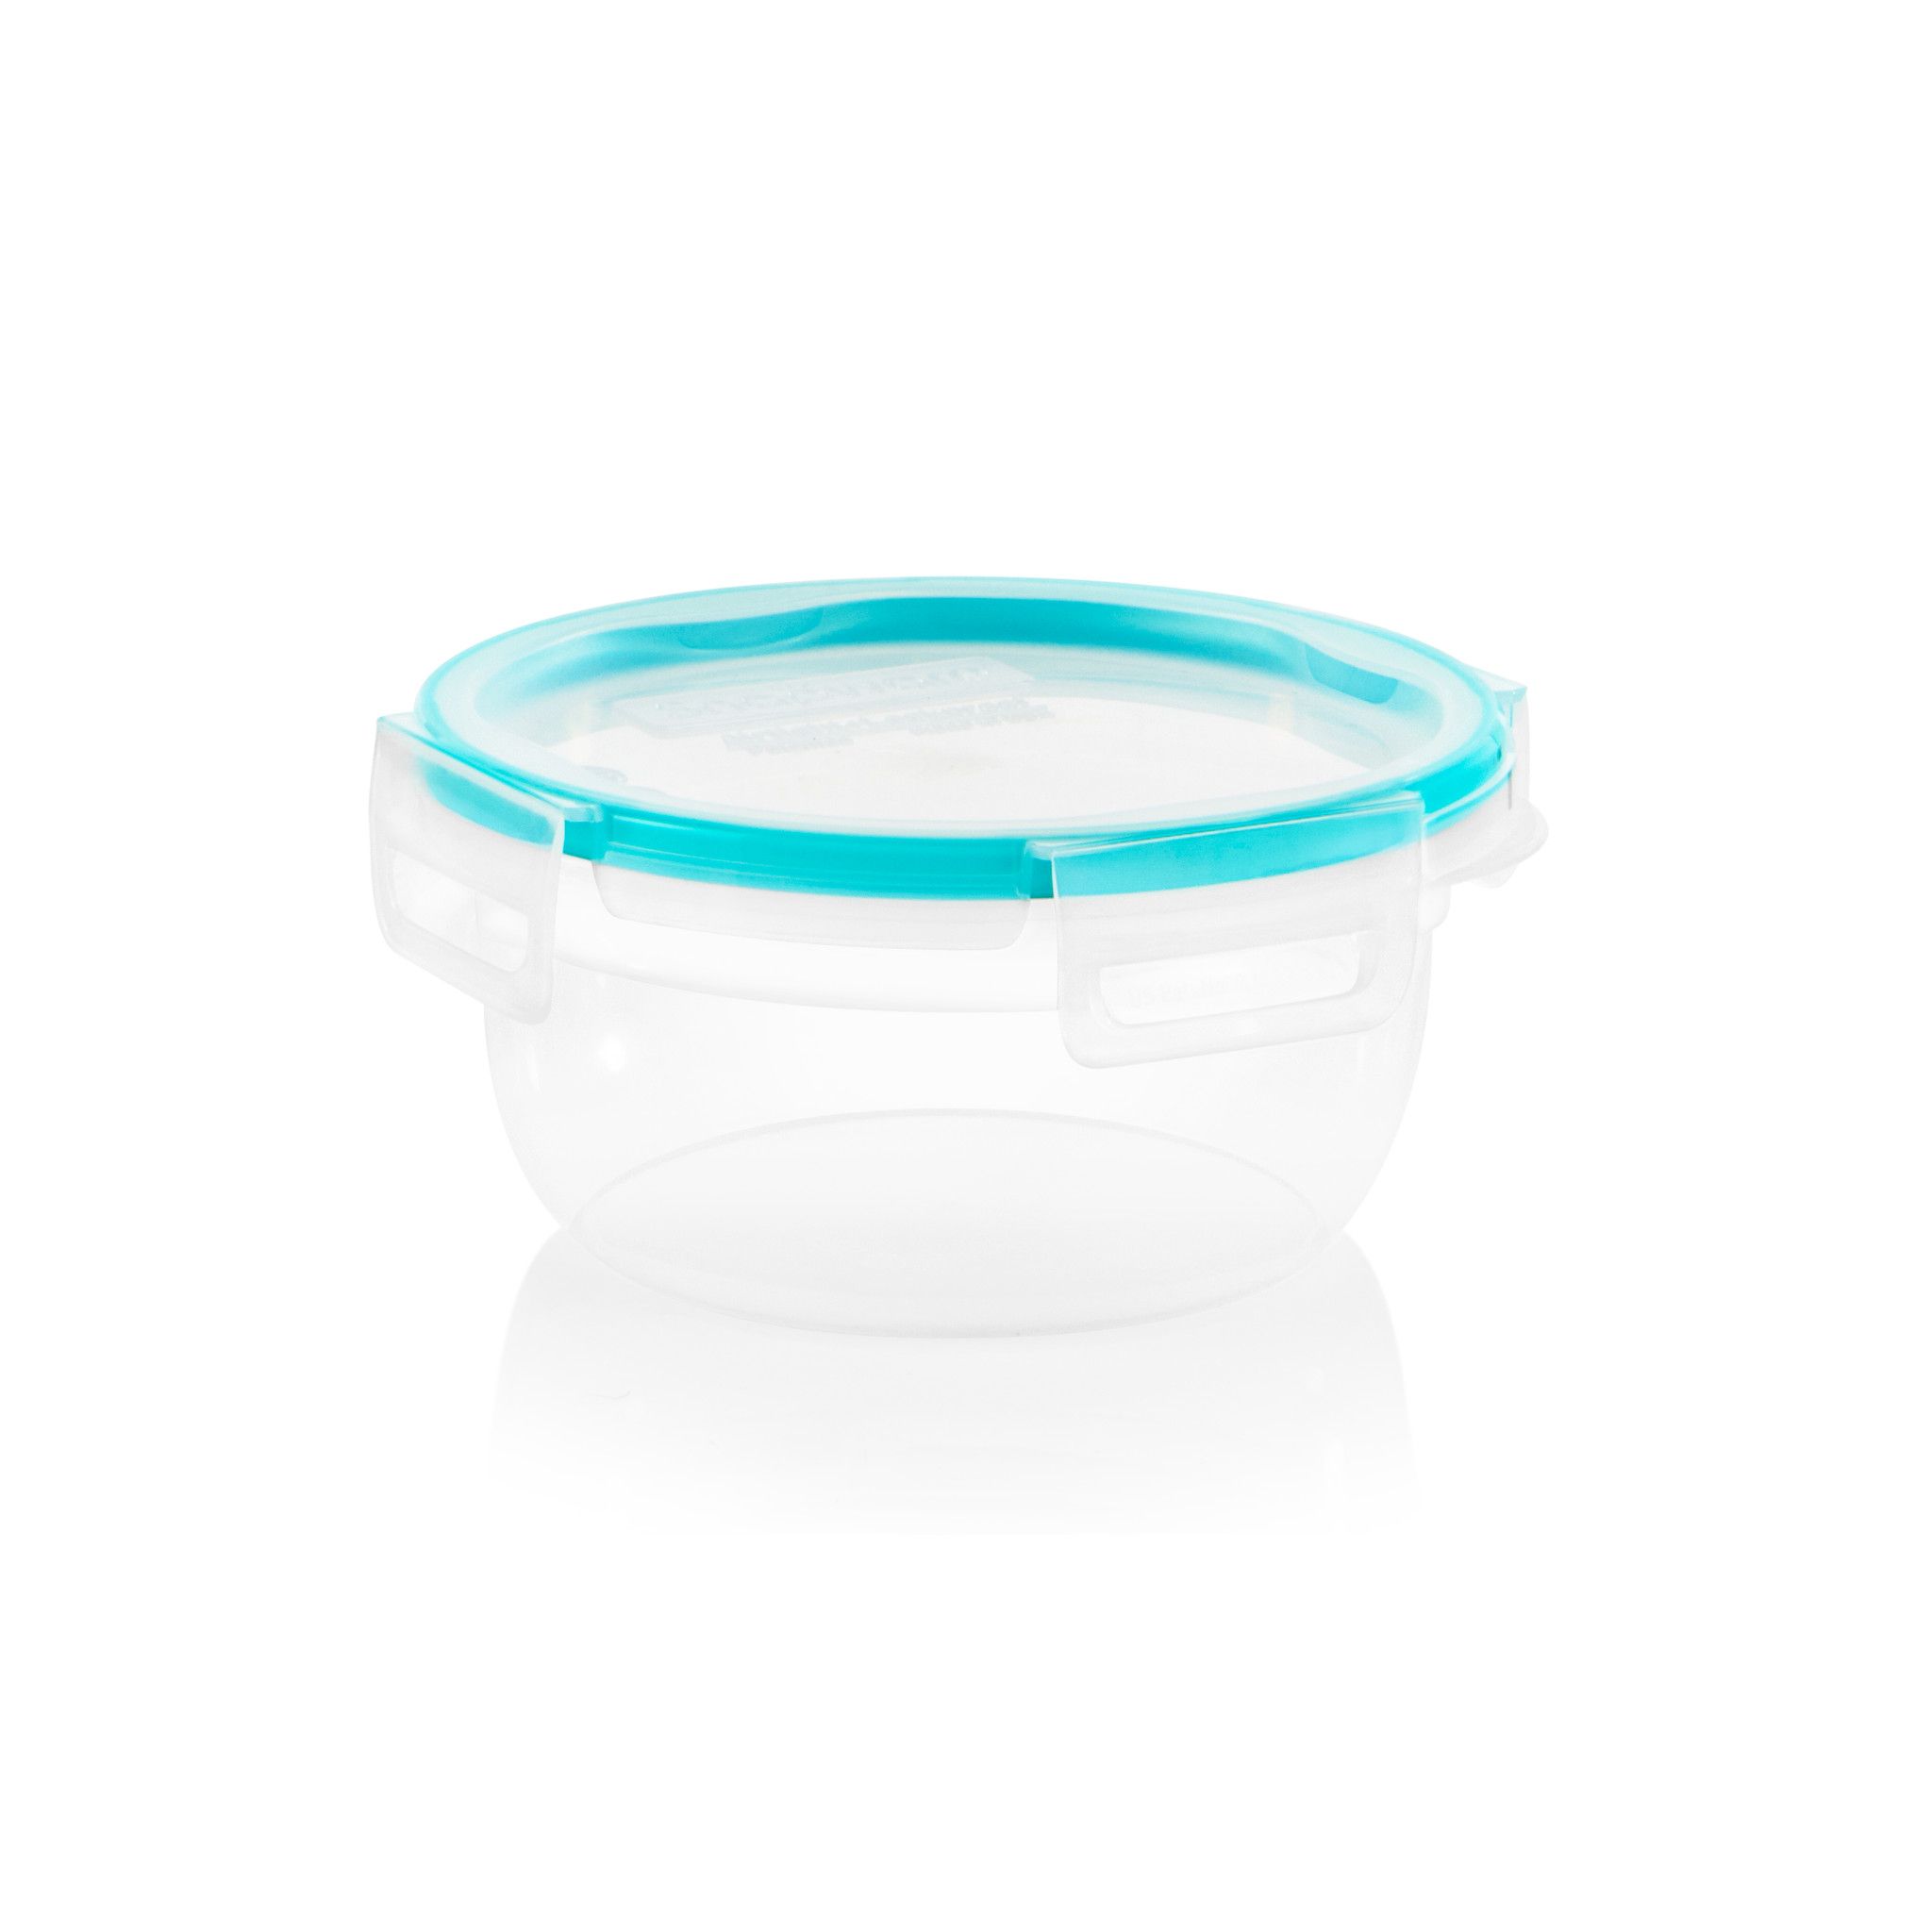 Snapware Replacement Lid Lids Various Sizes Shapes Colors YOU